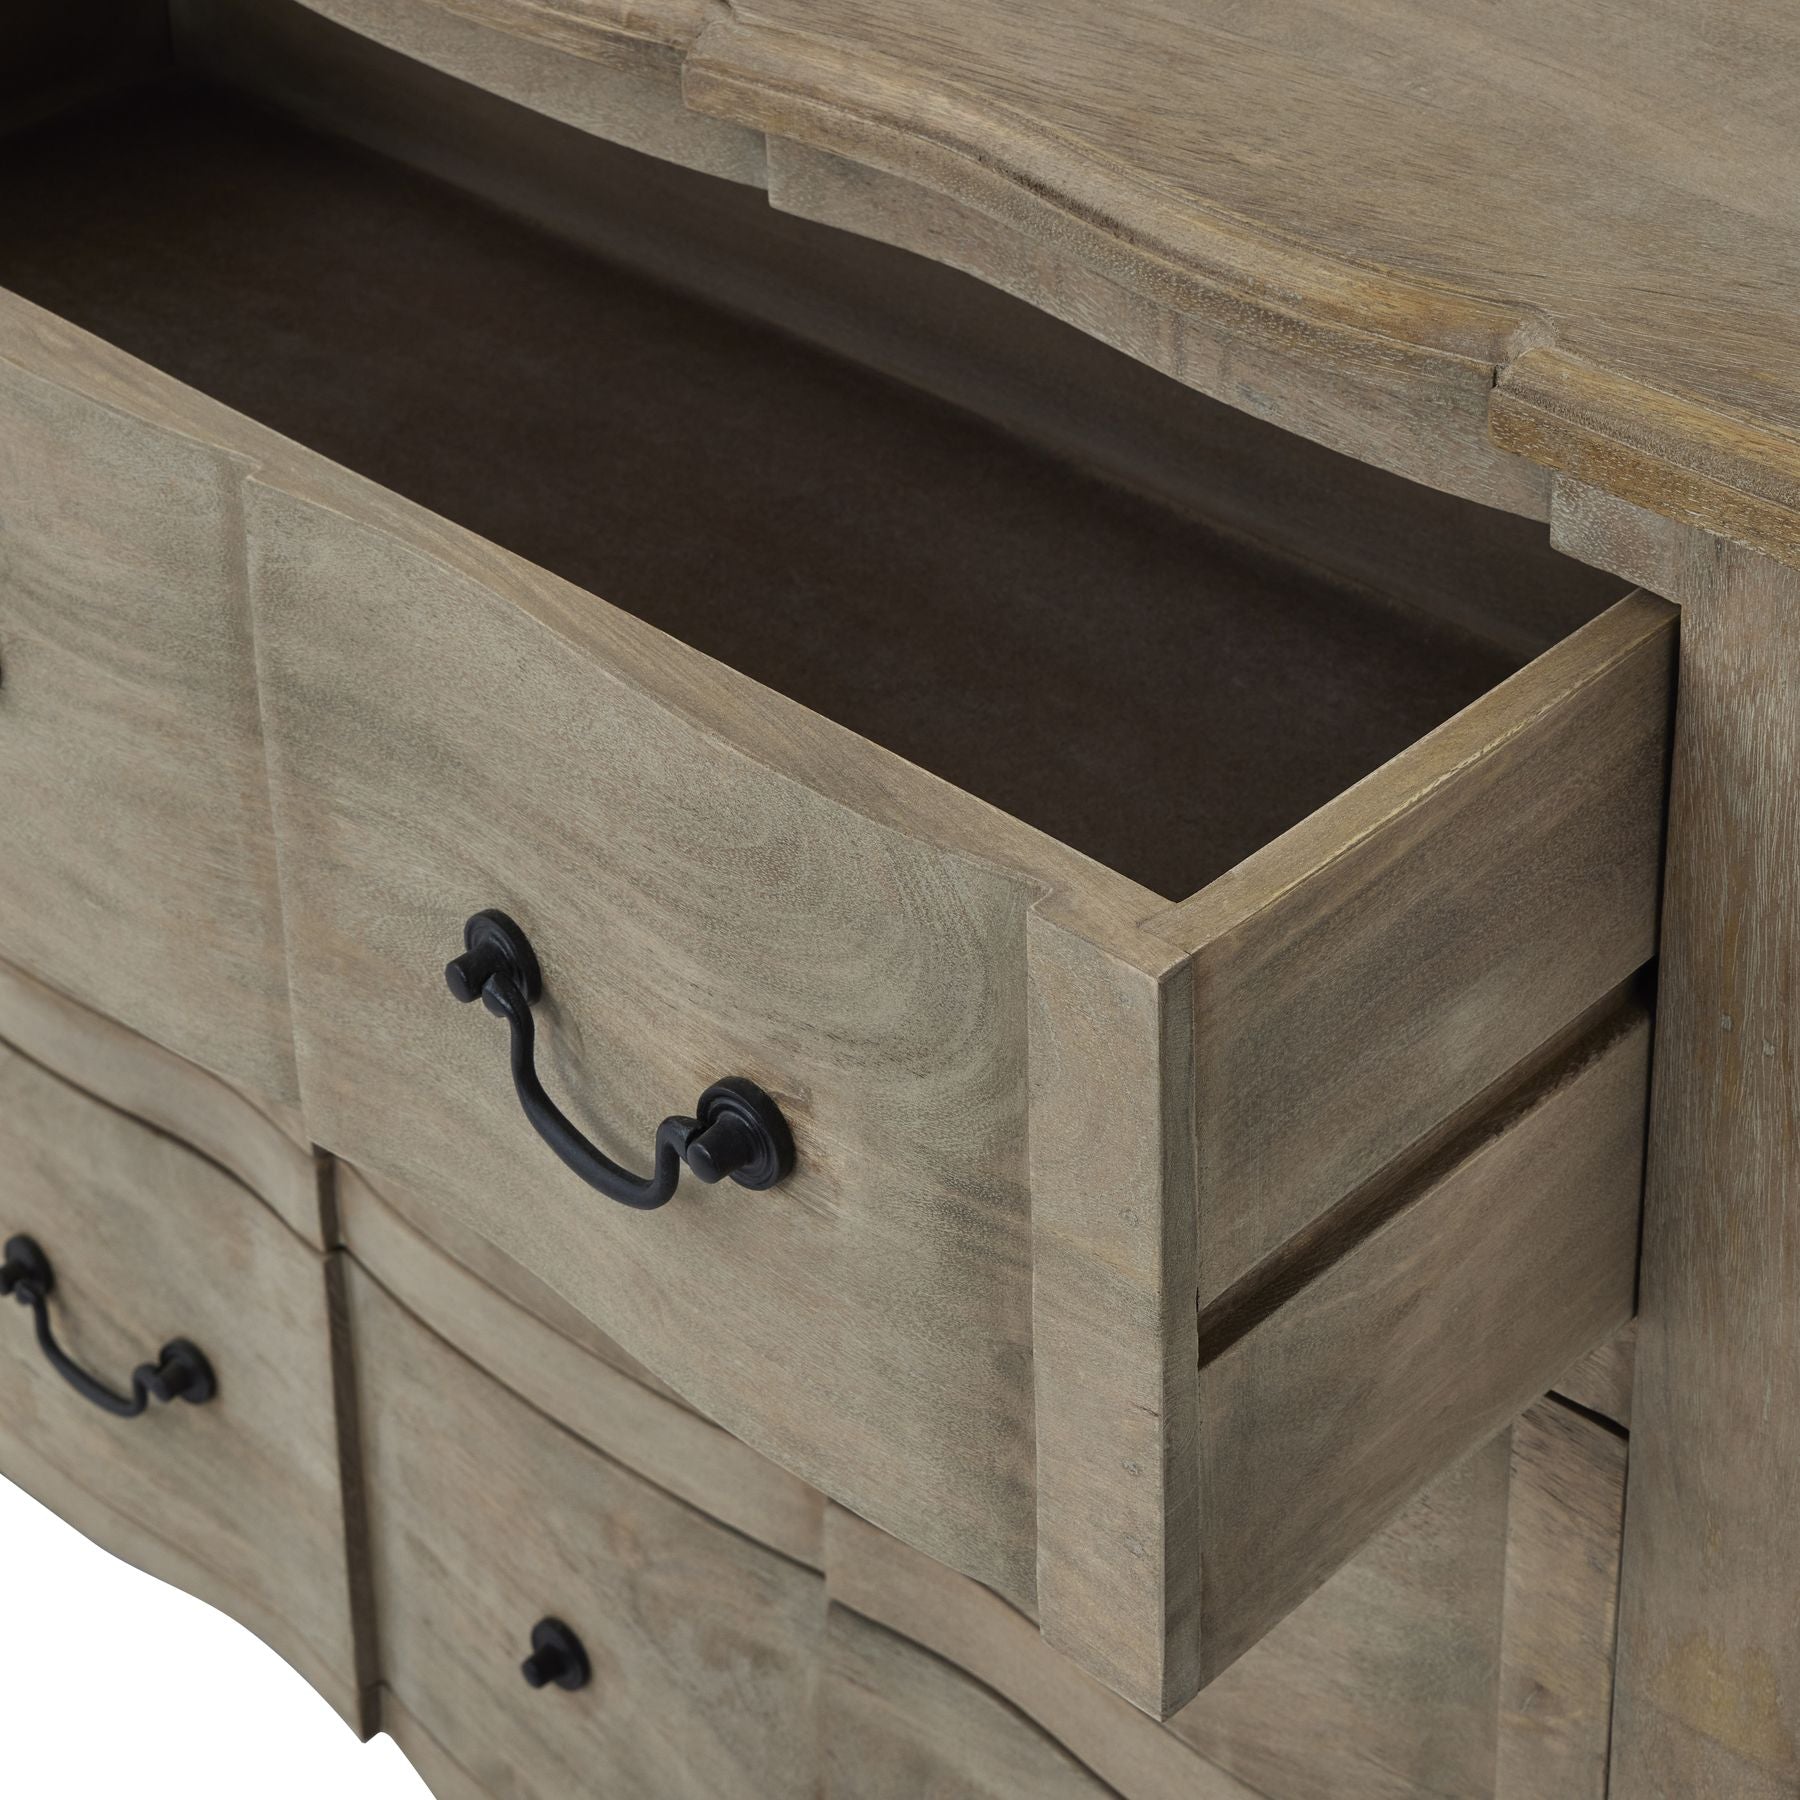 Evesham 6 Drawer Chest Pre-order for End of March